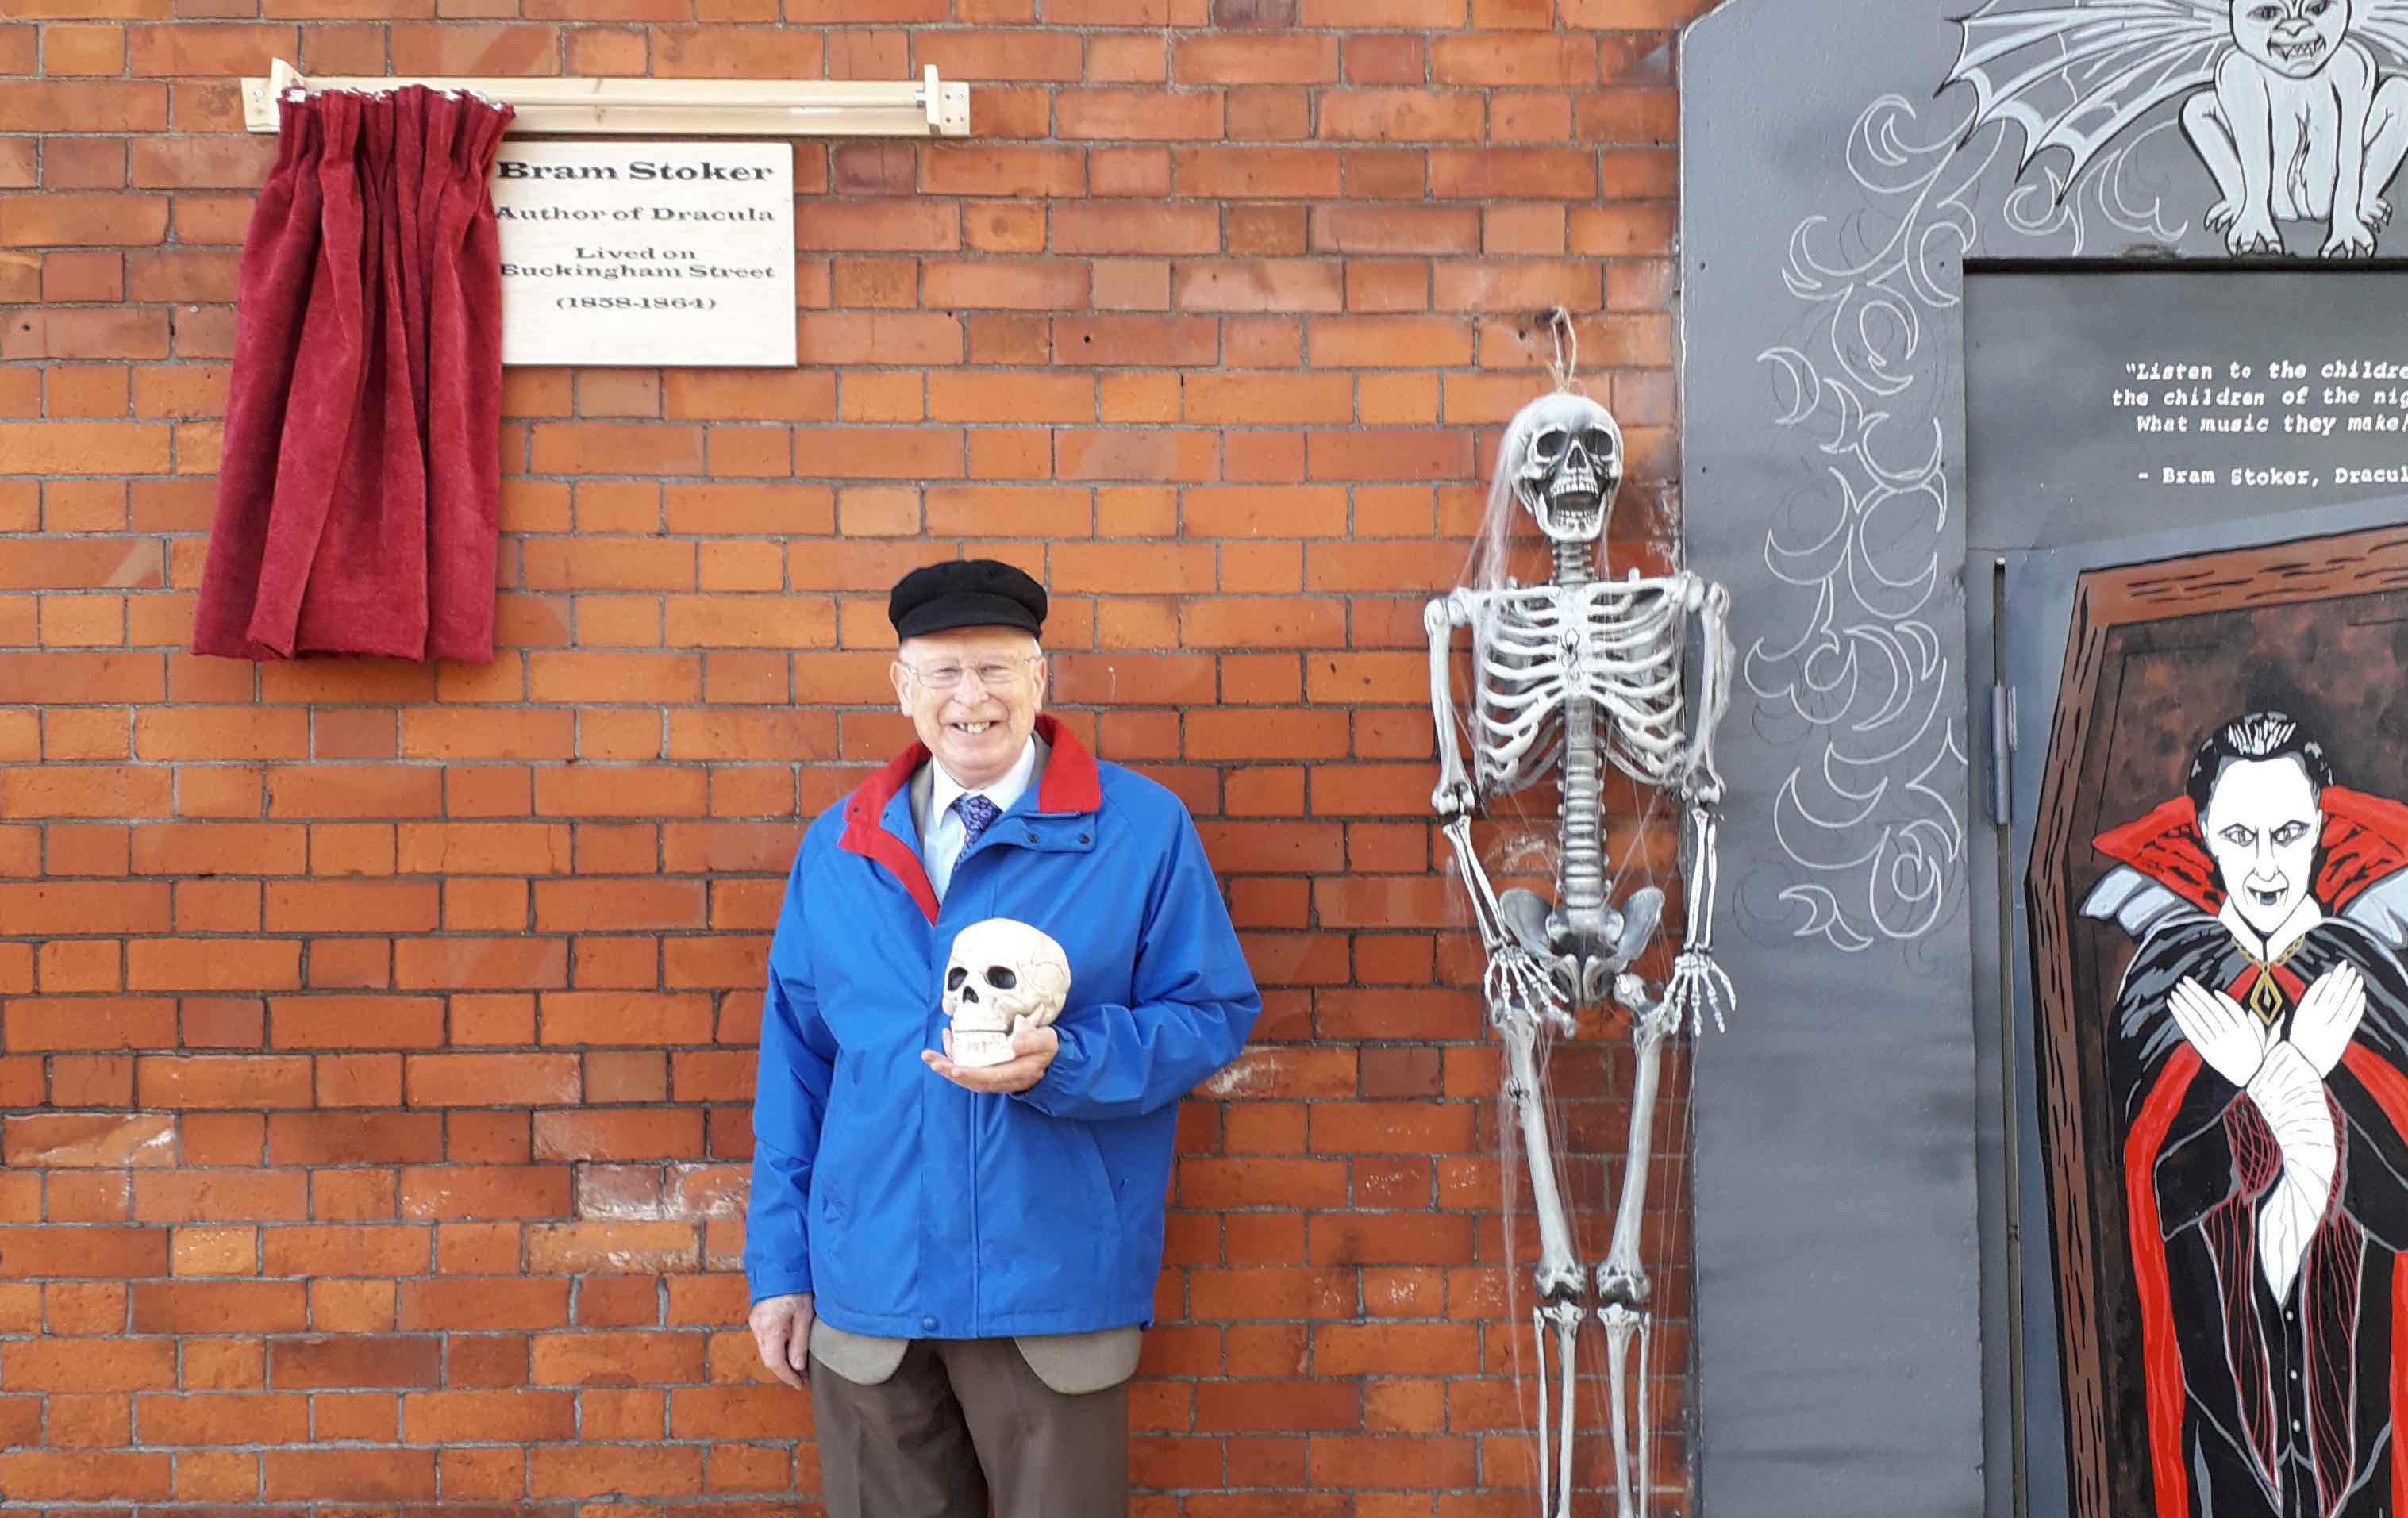 Douglas Appleyard at the unveiling of the plaque to Bram Stoker on Buckingham Street.